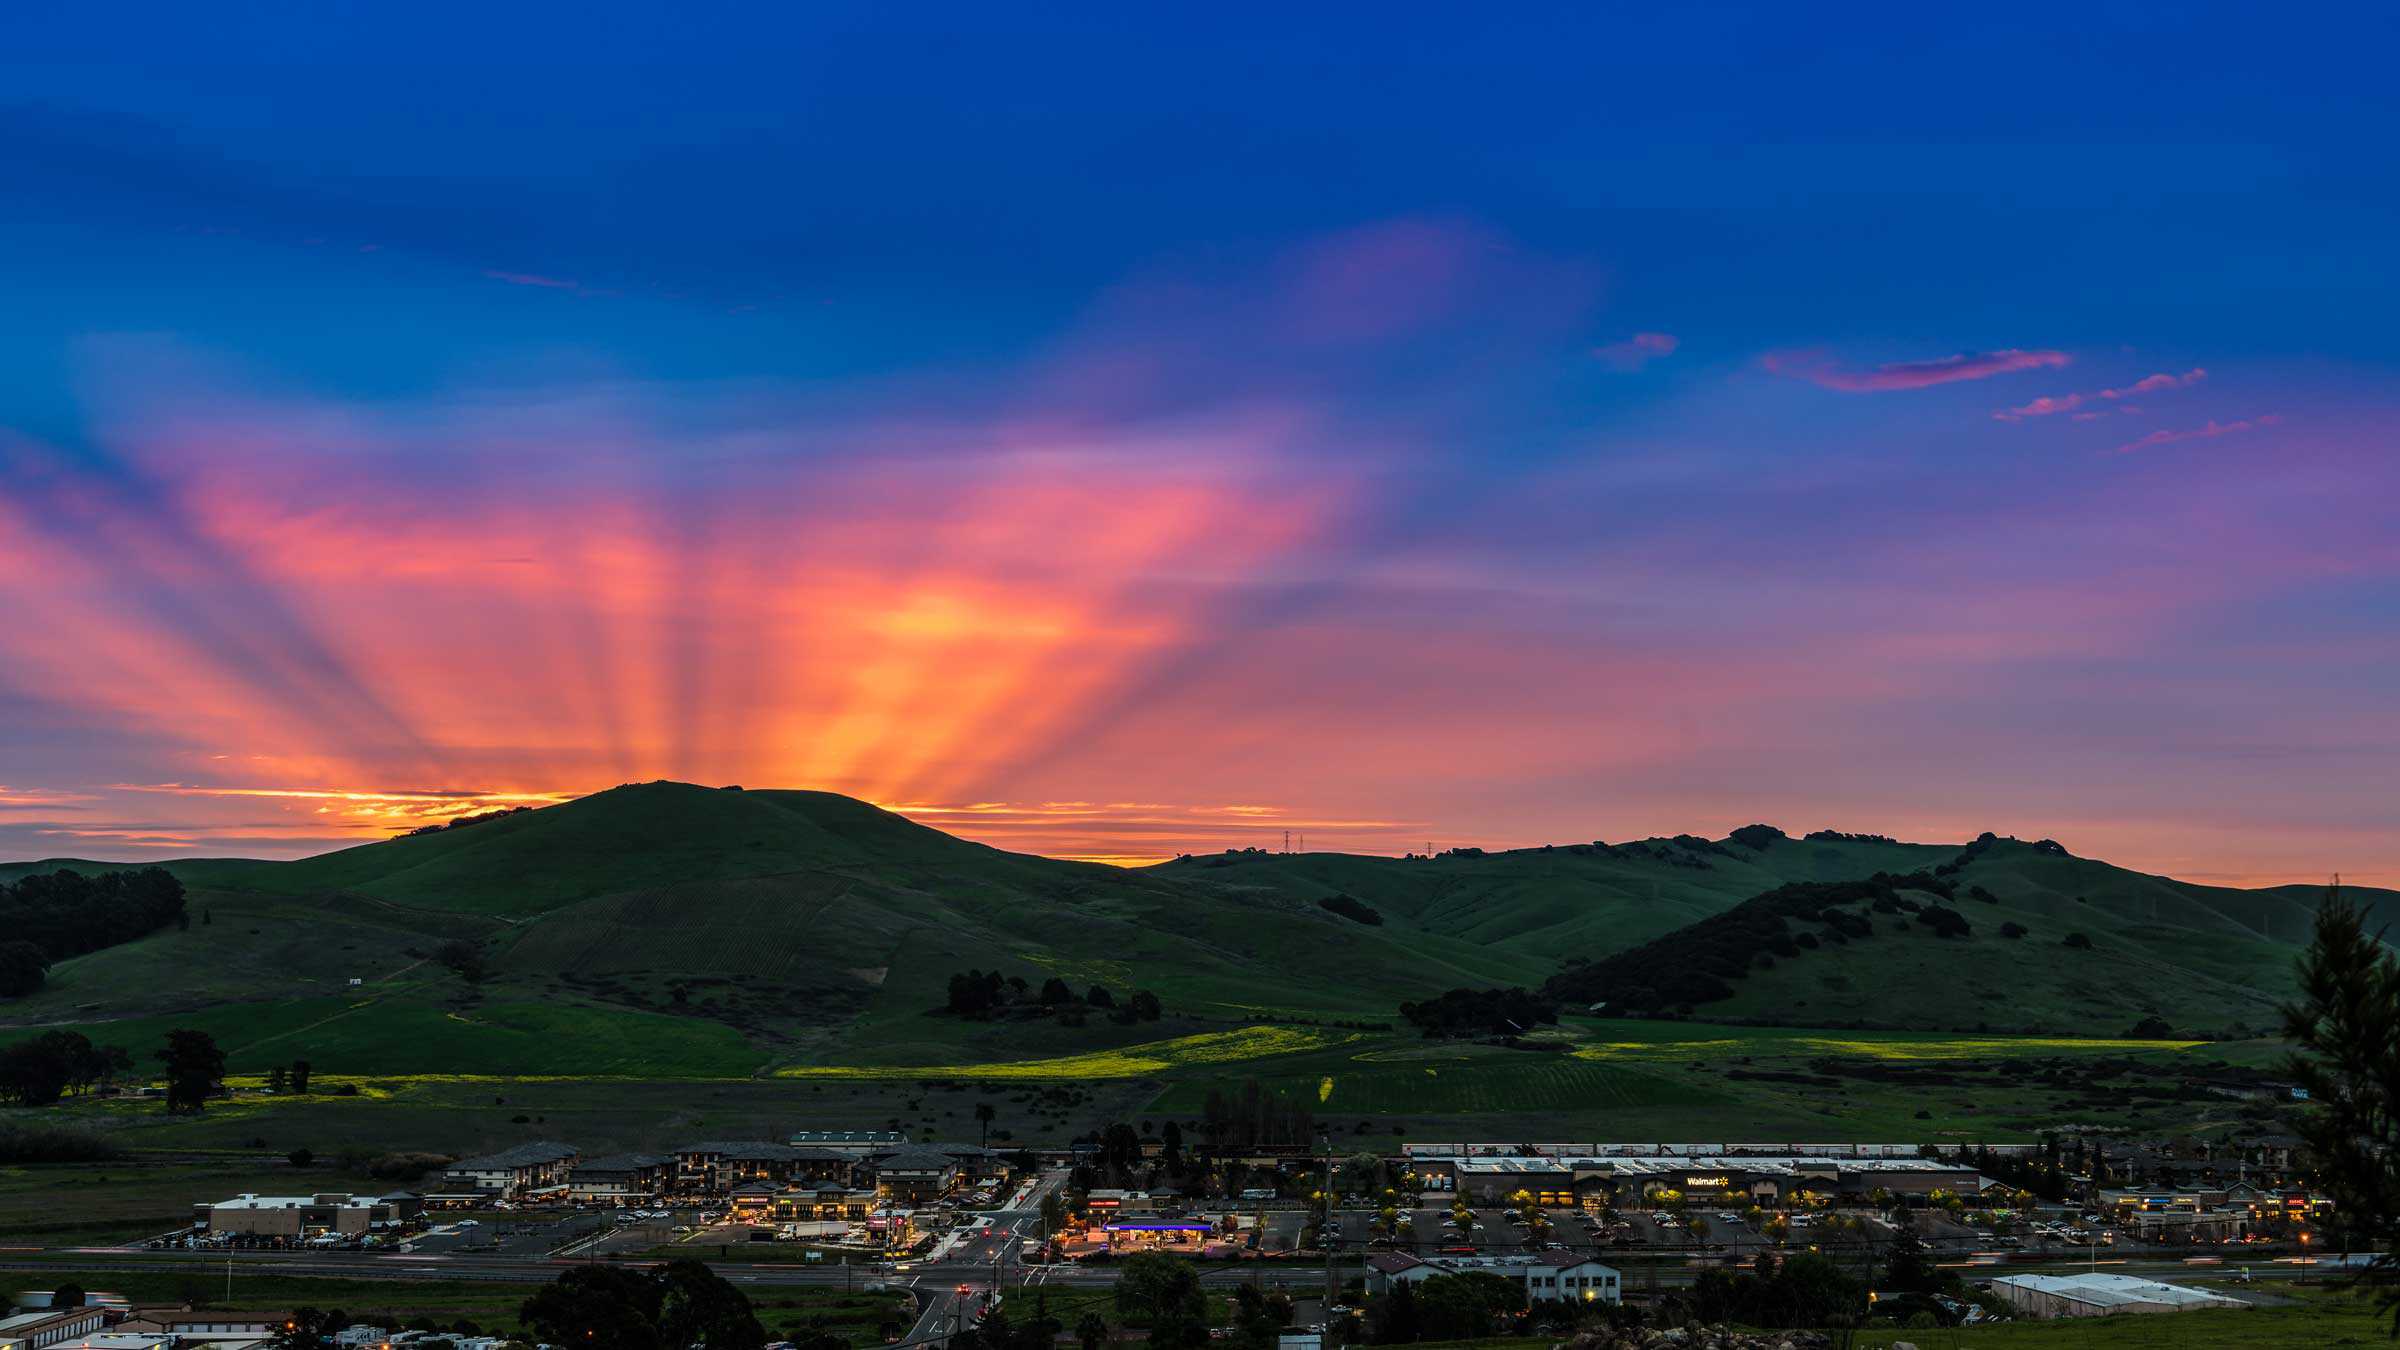 Sunset in American Canyon, Napa Valley